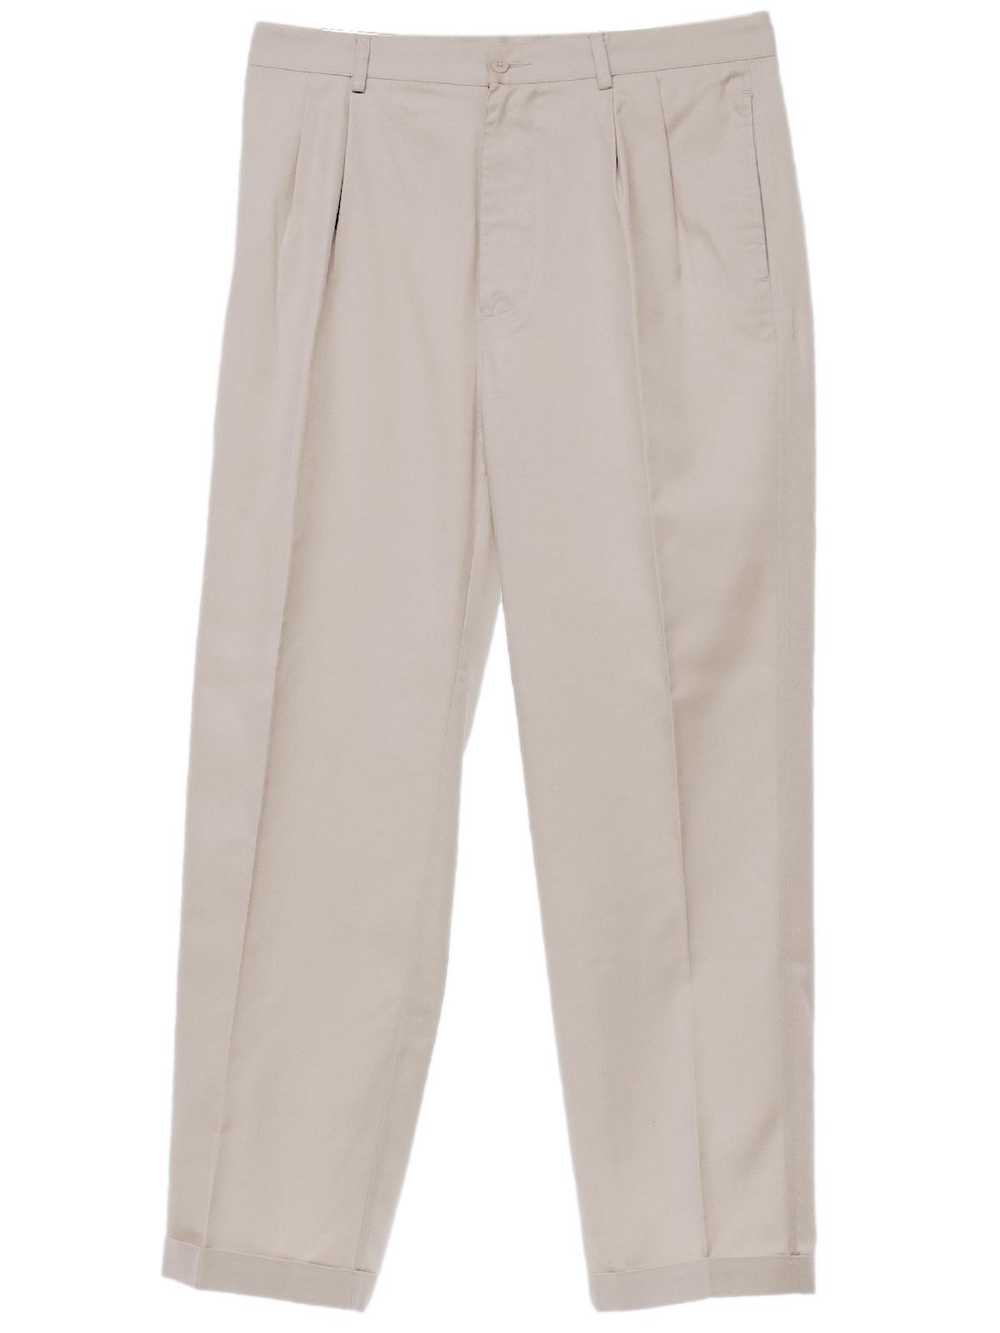 1990's Travel Smith Mens Pleated Pants - Gem